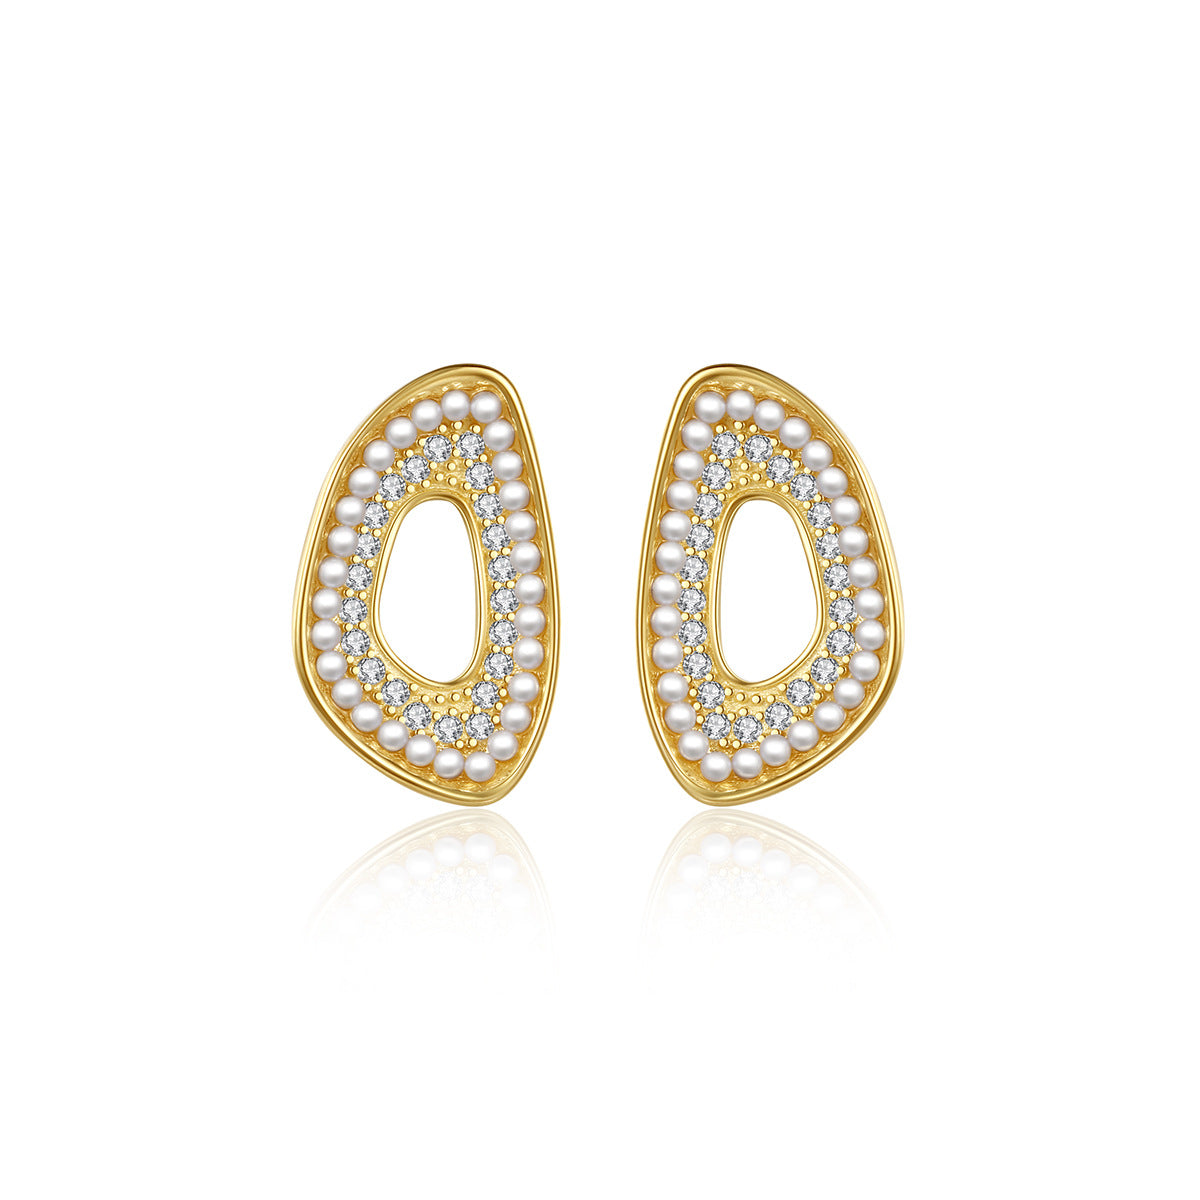 Gold Plated On 925 Silver Pearl Stud Earrings